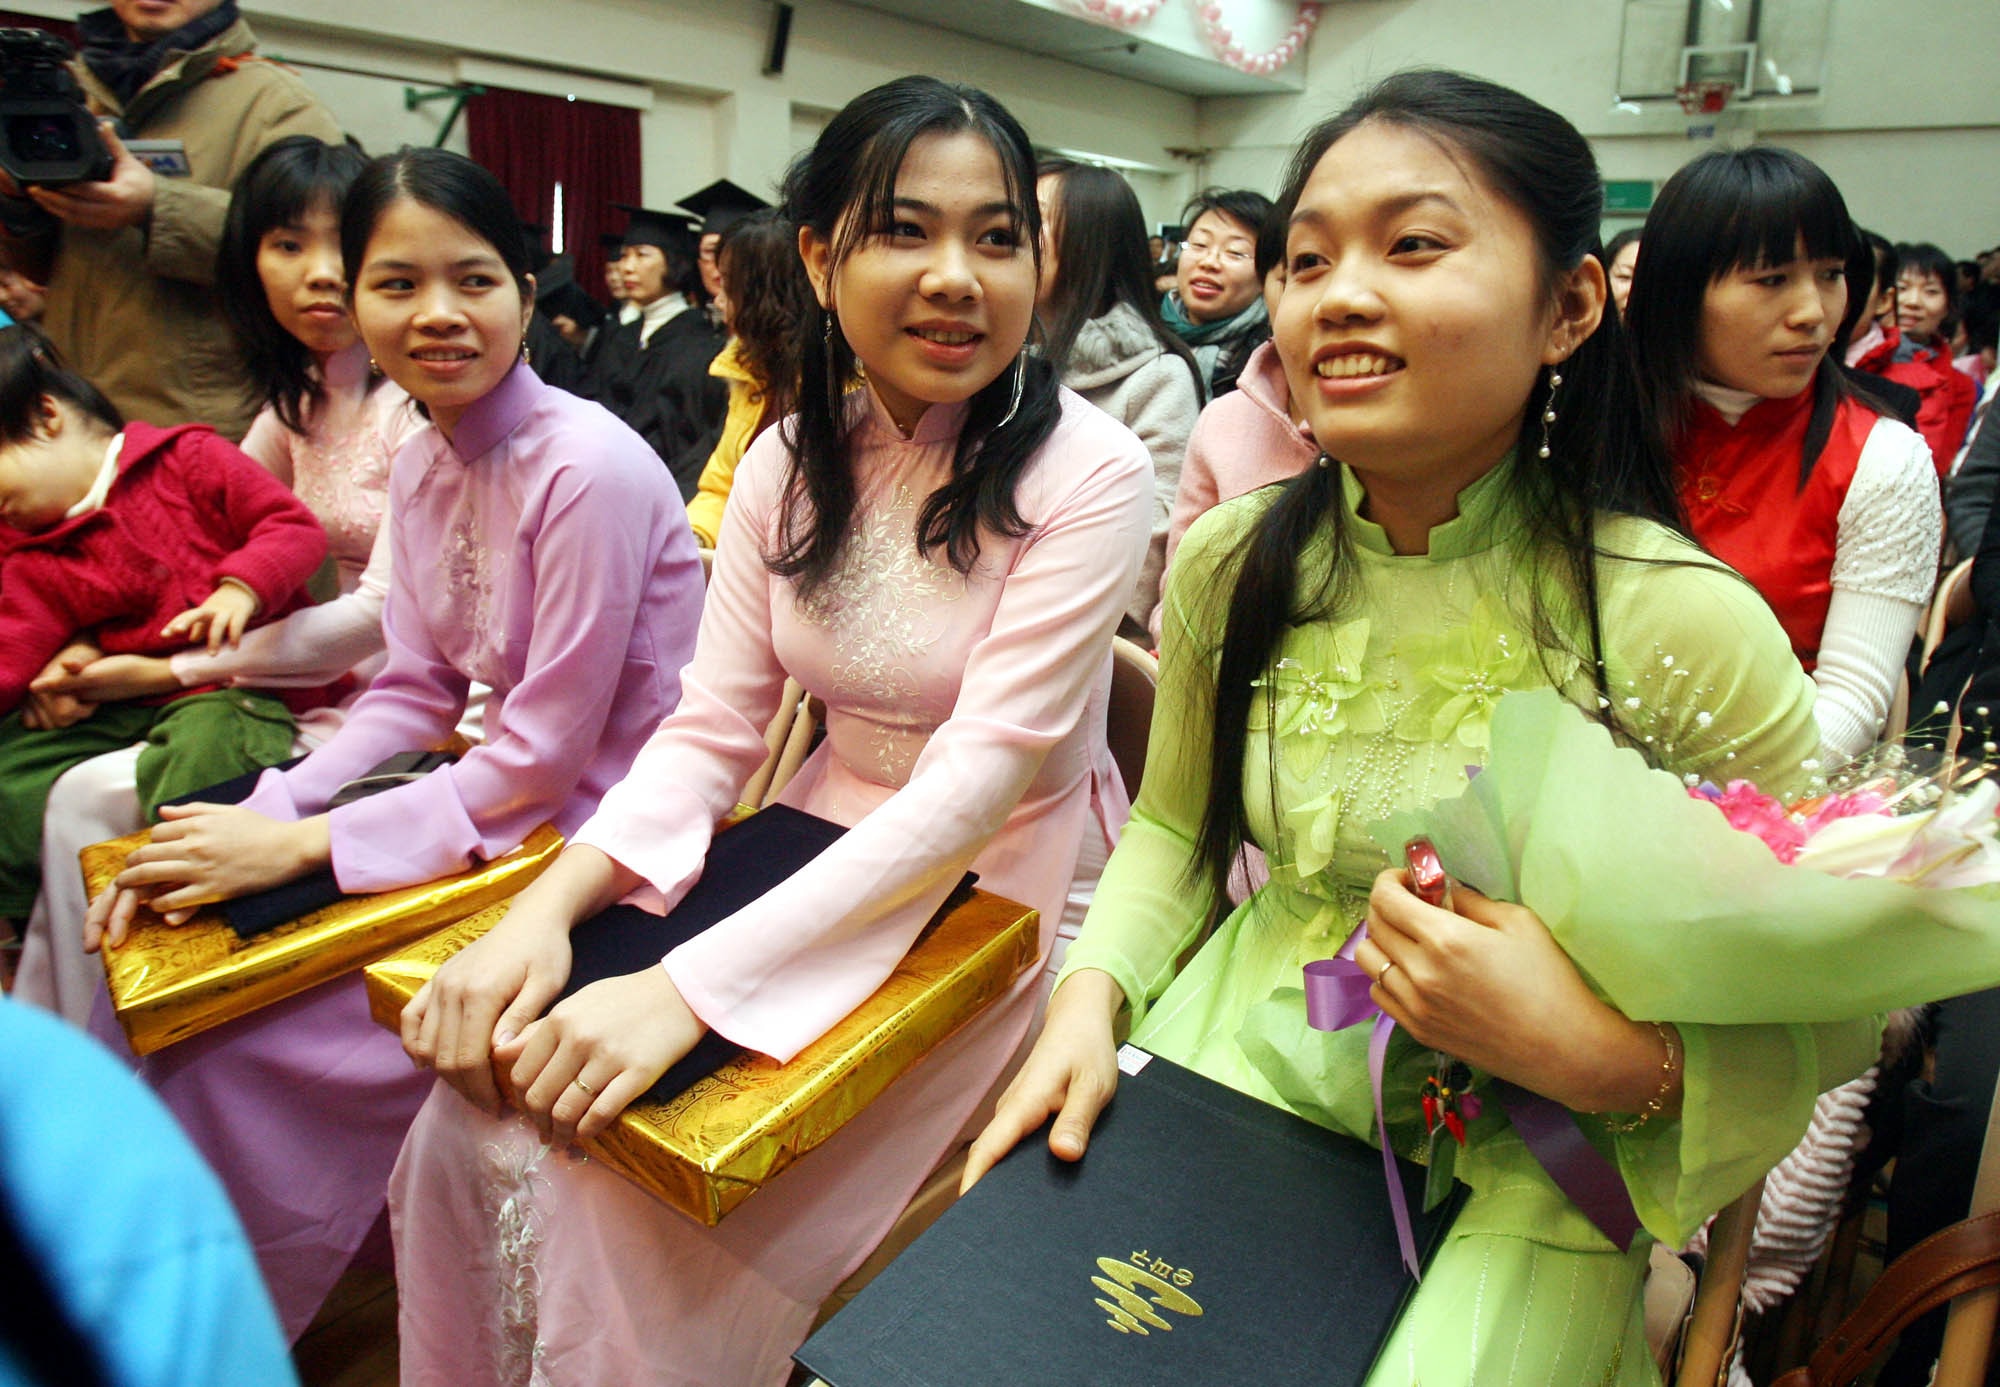 Migrant wives dressed in their home country's traditional costumes, smile after graduating from a Korean-language (AAP Image/Yonhap News Agency) NO ARCHIVING, AUSTRALIA ONLY